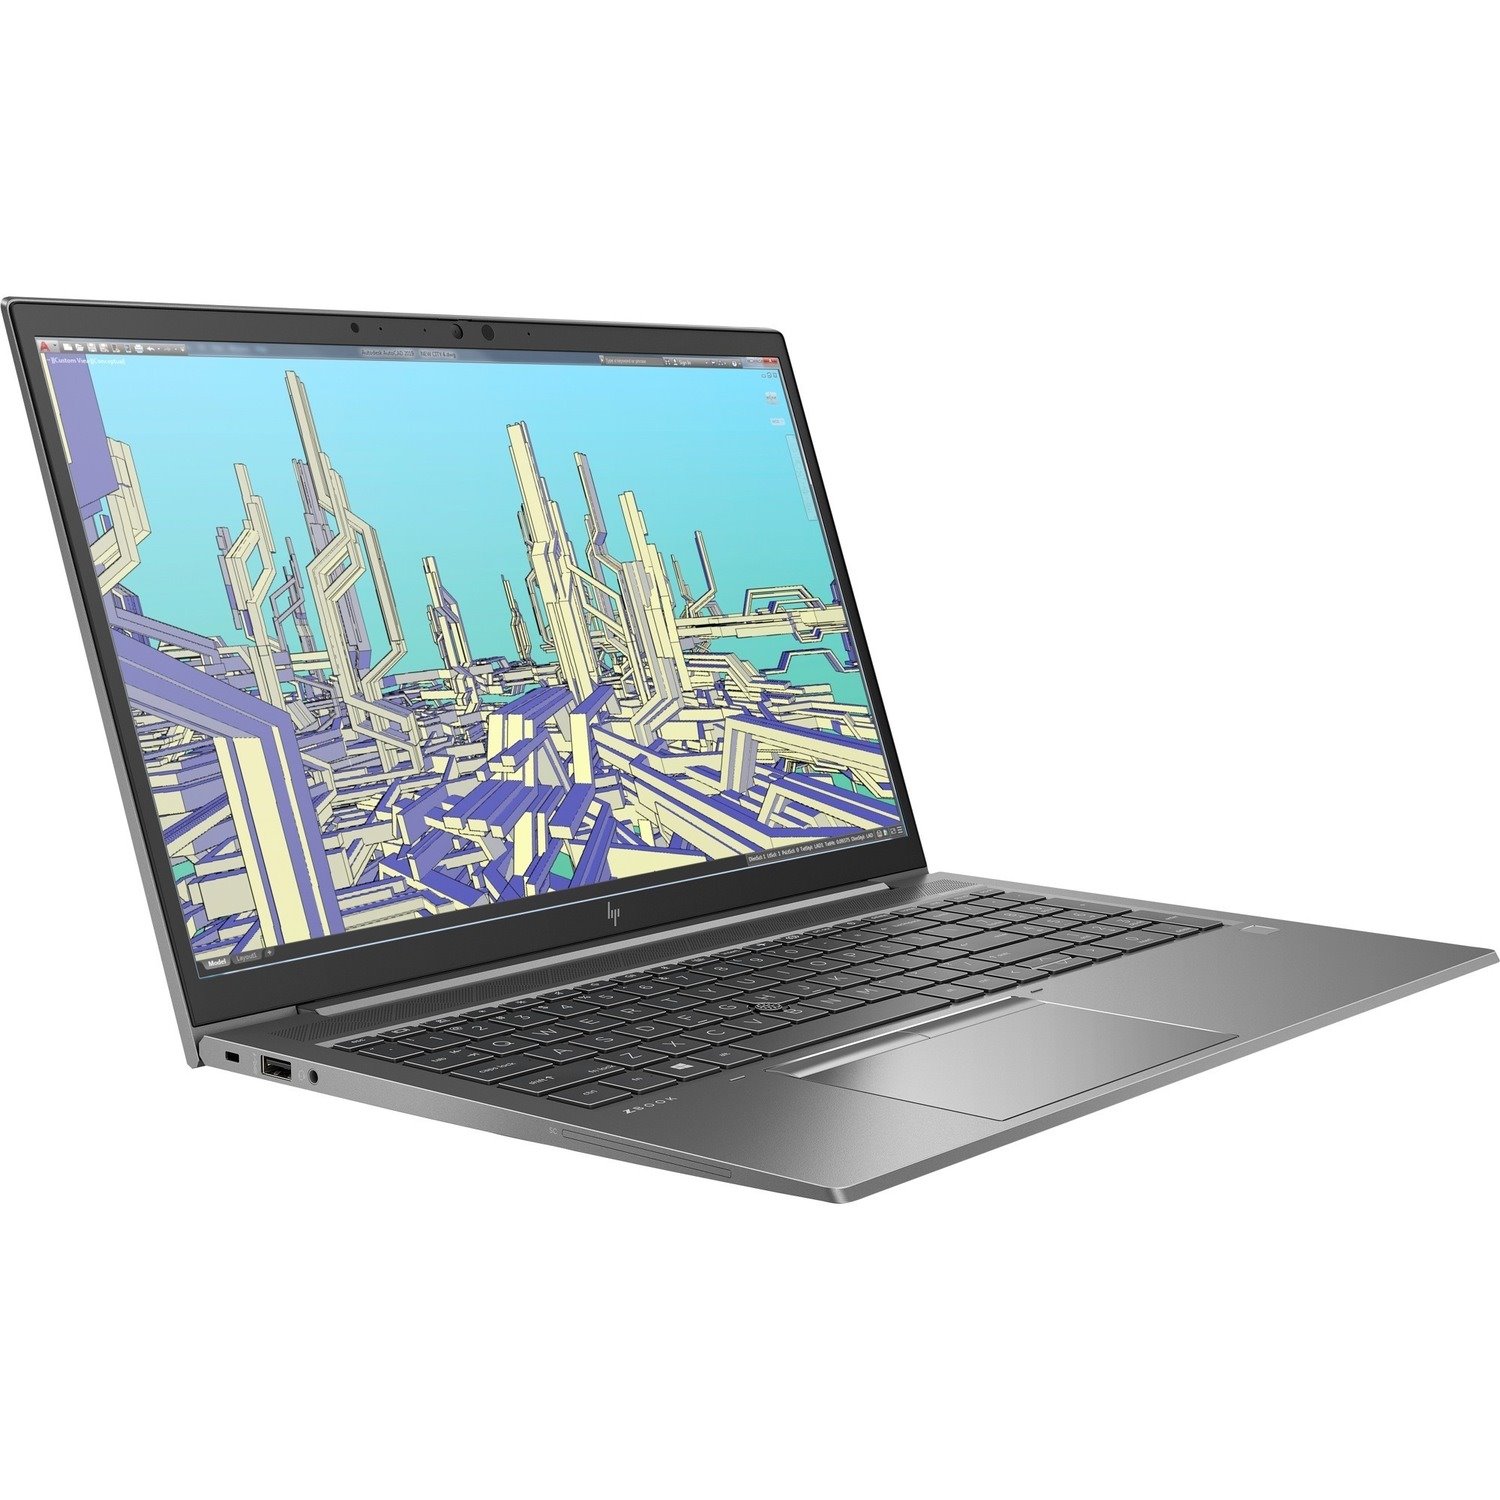 HP ZBook Firefly G8 35.6 cm (14") Mobile Workstation - Full HD - 1920 x 1080 - Intel Core i7 11th Gen i7-1165G7 Quad-core (4 Core) 2.80 GHz - 16 GB Total RAM - 512 GB SSD